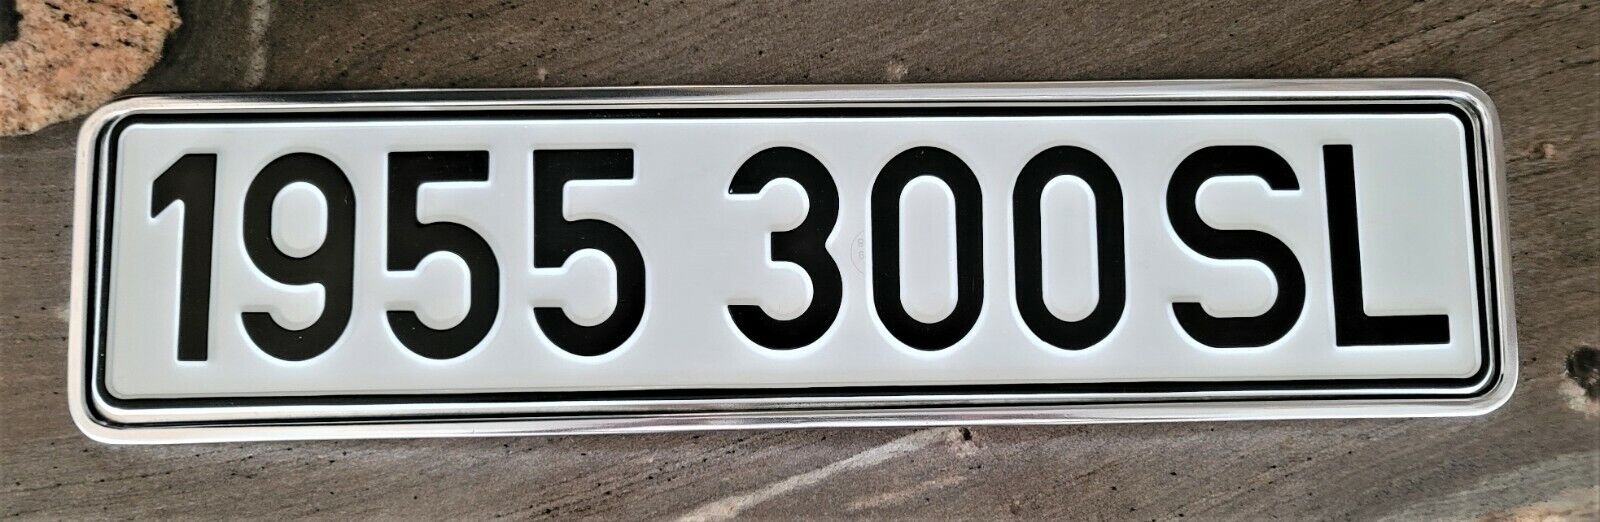 Mercedes 300SL Gullwing license plate and frame